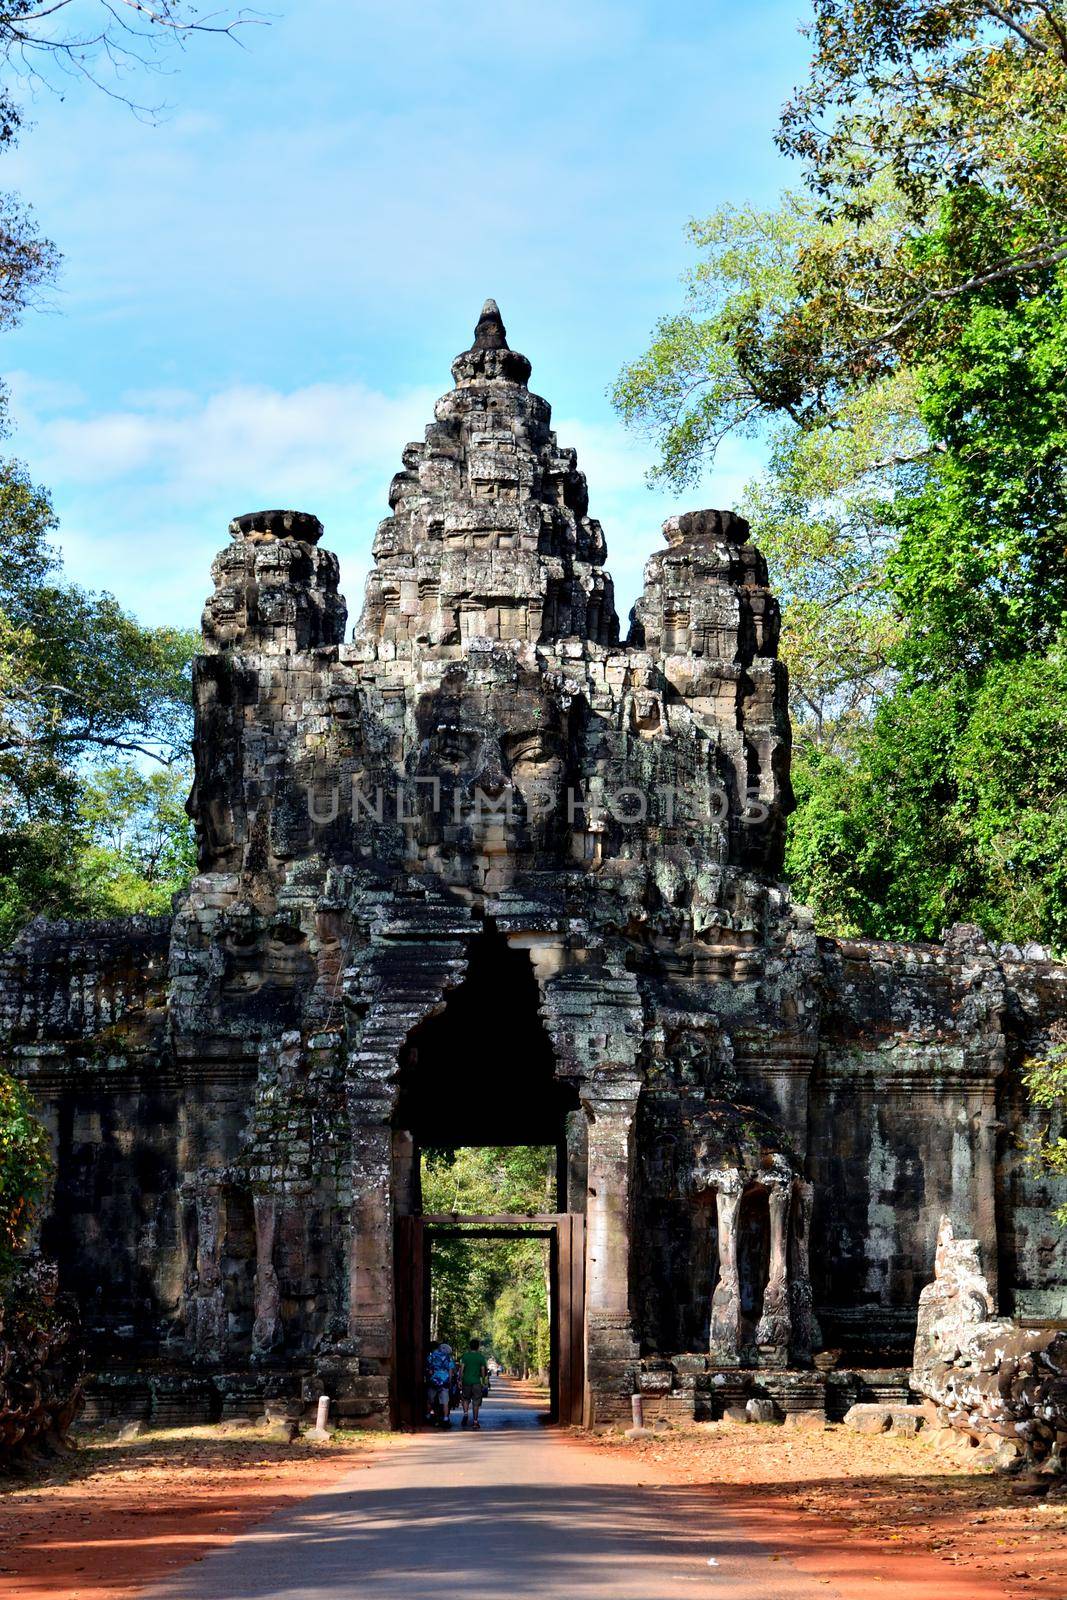 View of the magnificent entrance to the complex of Angkor Thom by silentstock639